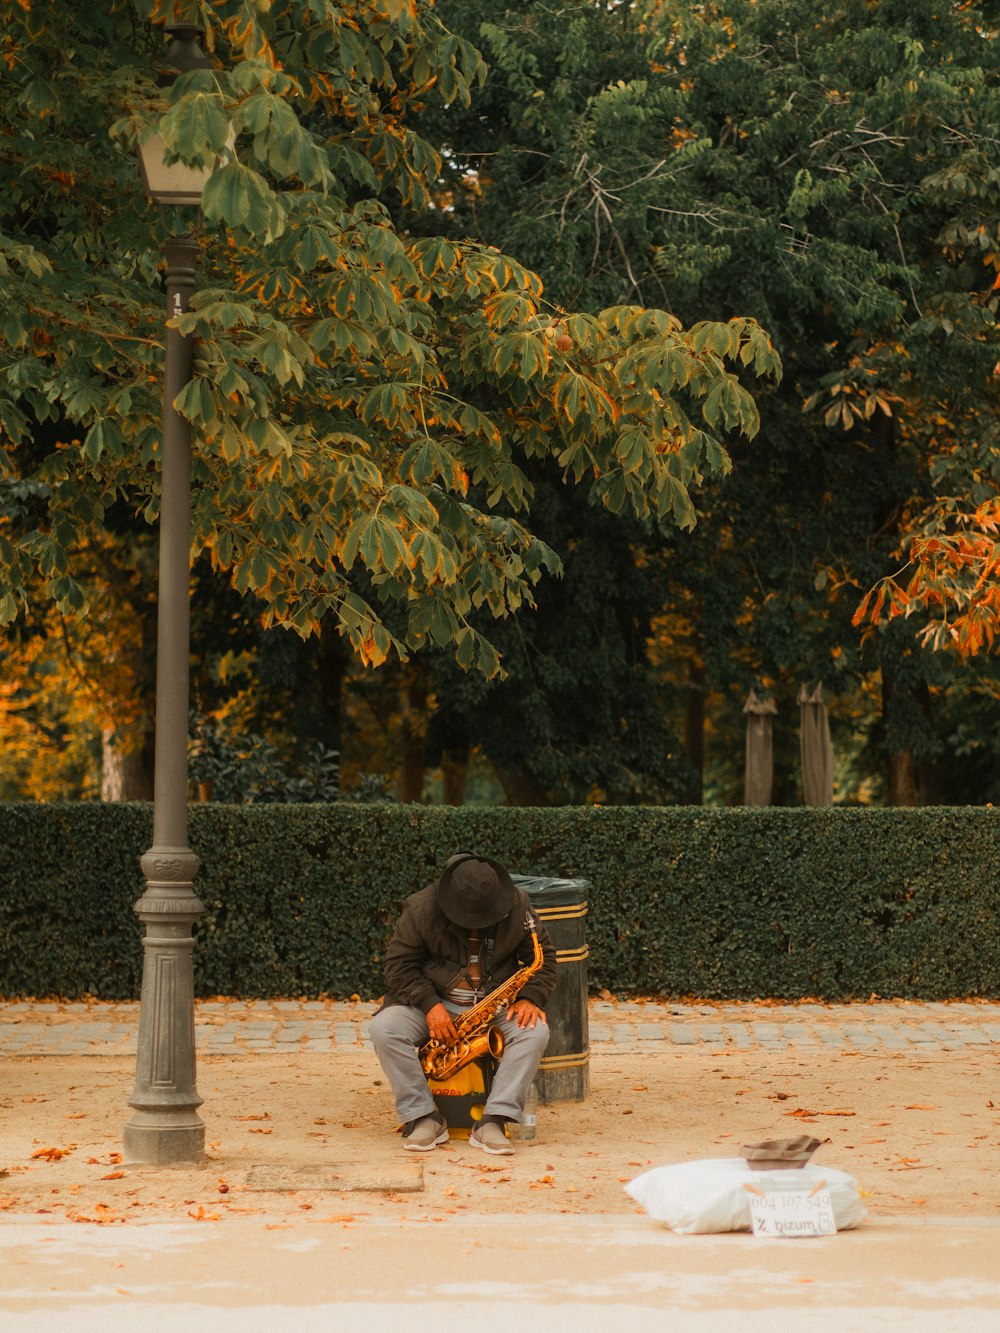 a man sitting on a bench playing a guitar